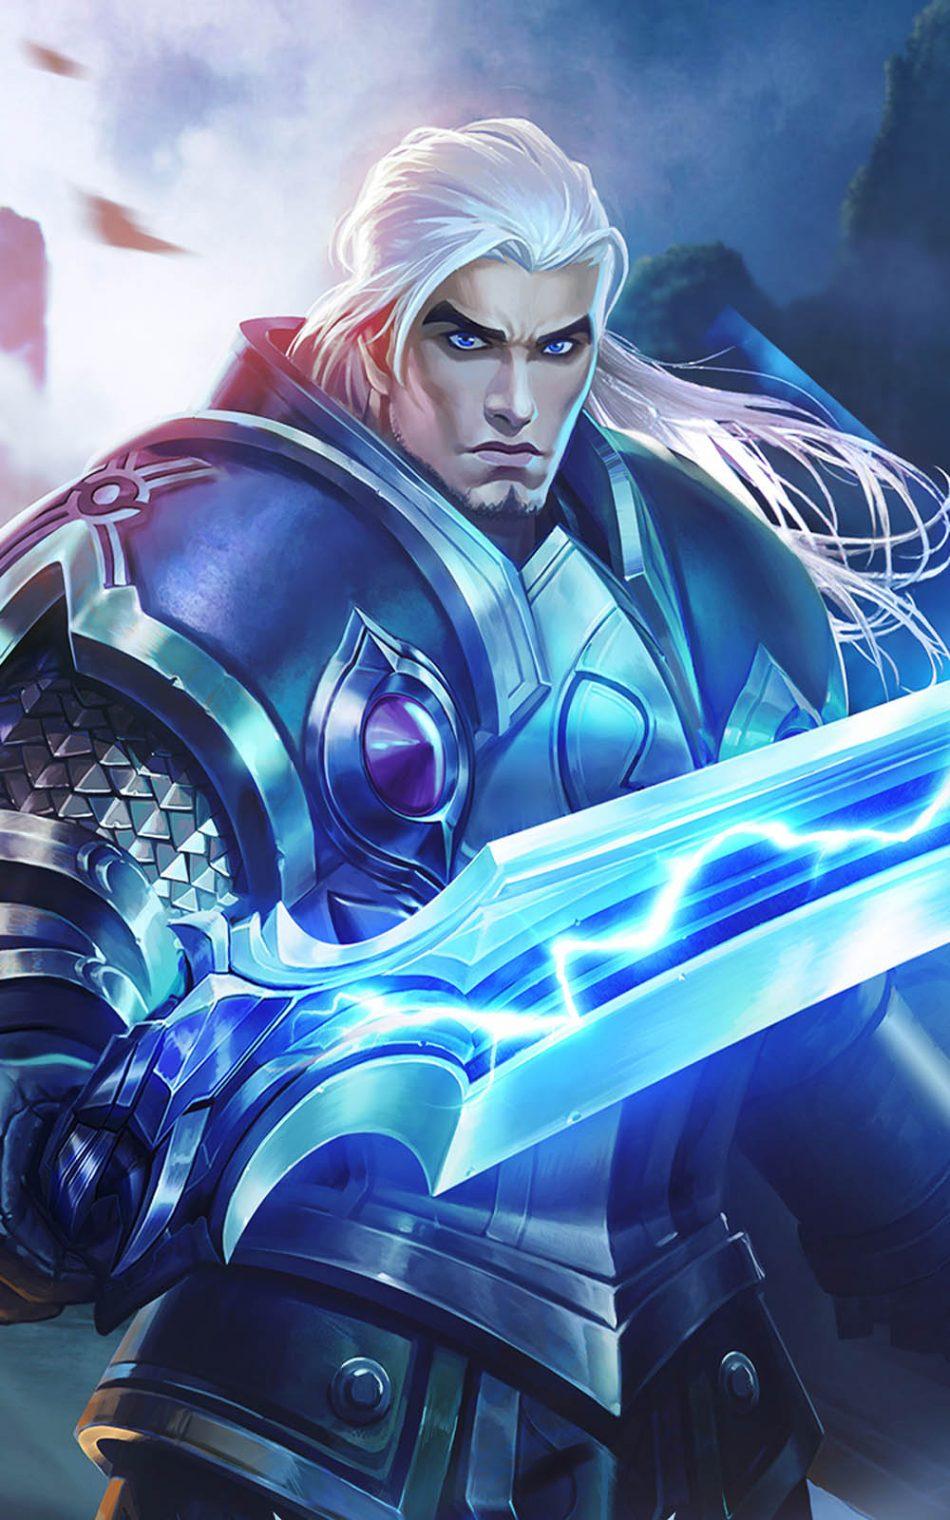 Download Tigreal Mobile Legends Hero Free Pure 4K Ultra HD